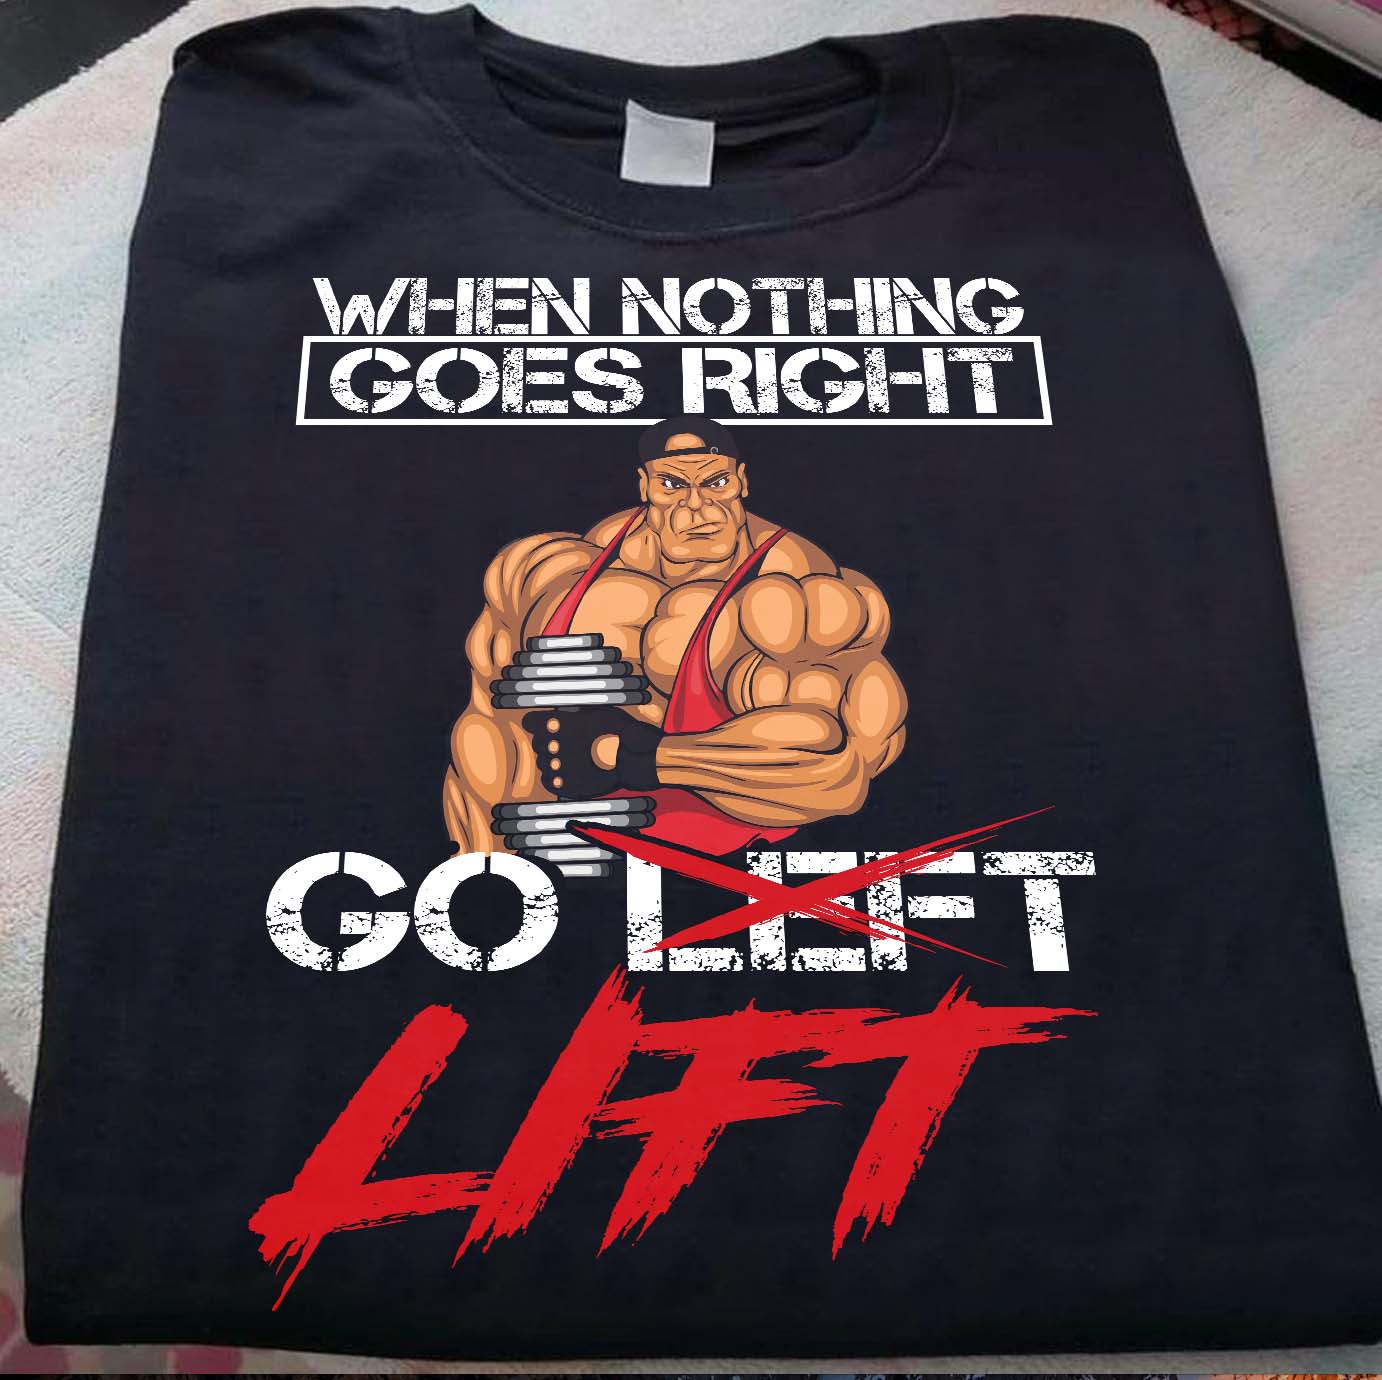 When nothing goes right go lift - Powerlifter